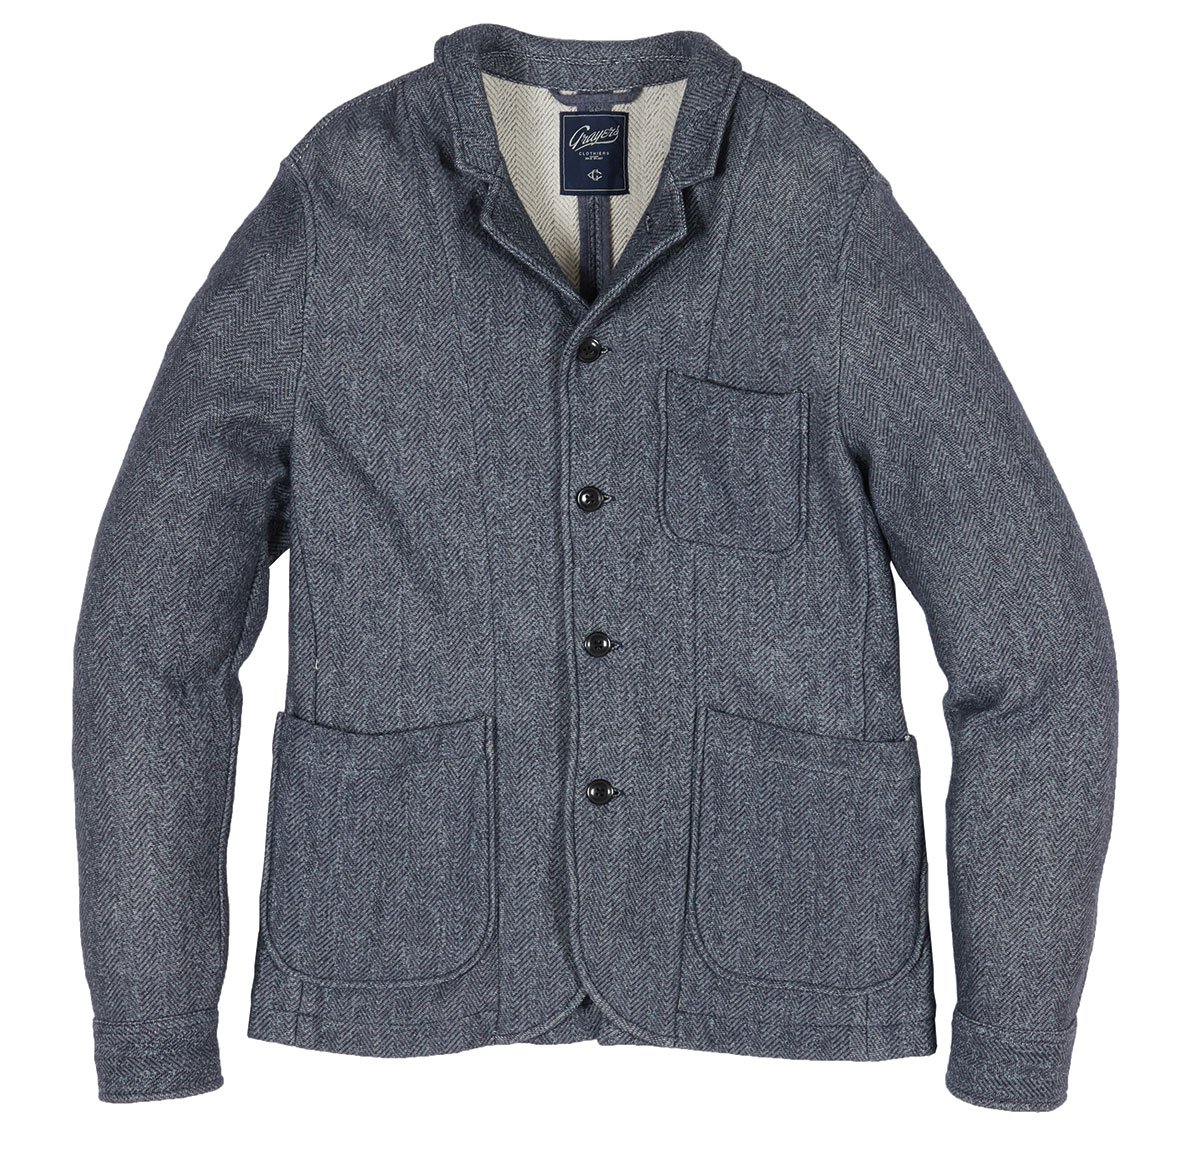 Grayers : Limited Time - 25% Off Sitewide + Our Best Fall Jackets | Milled